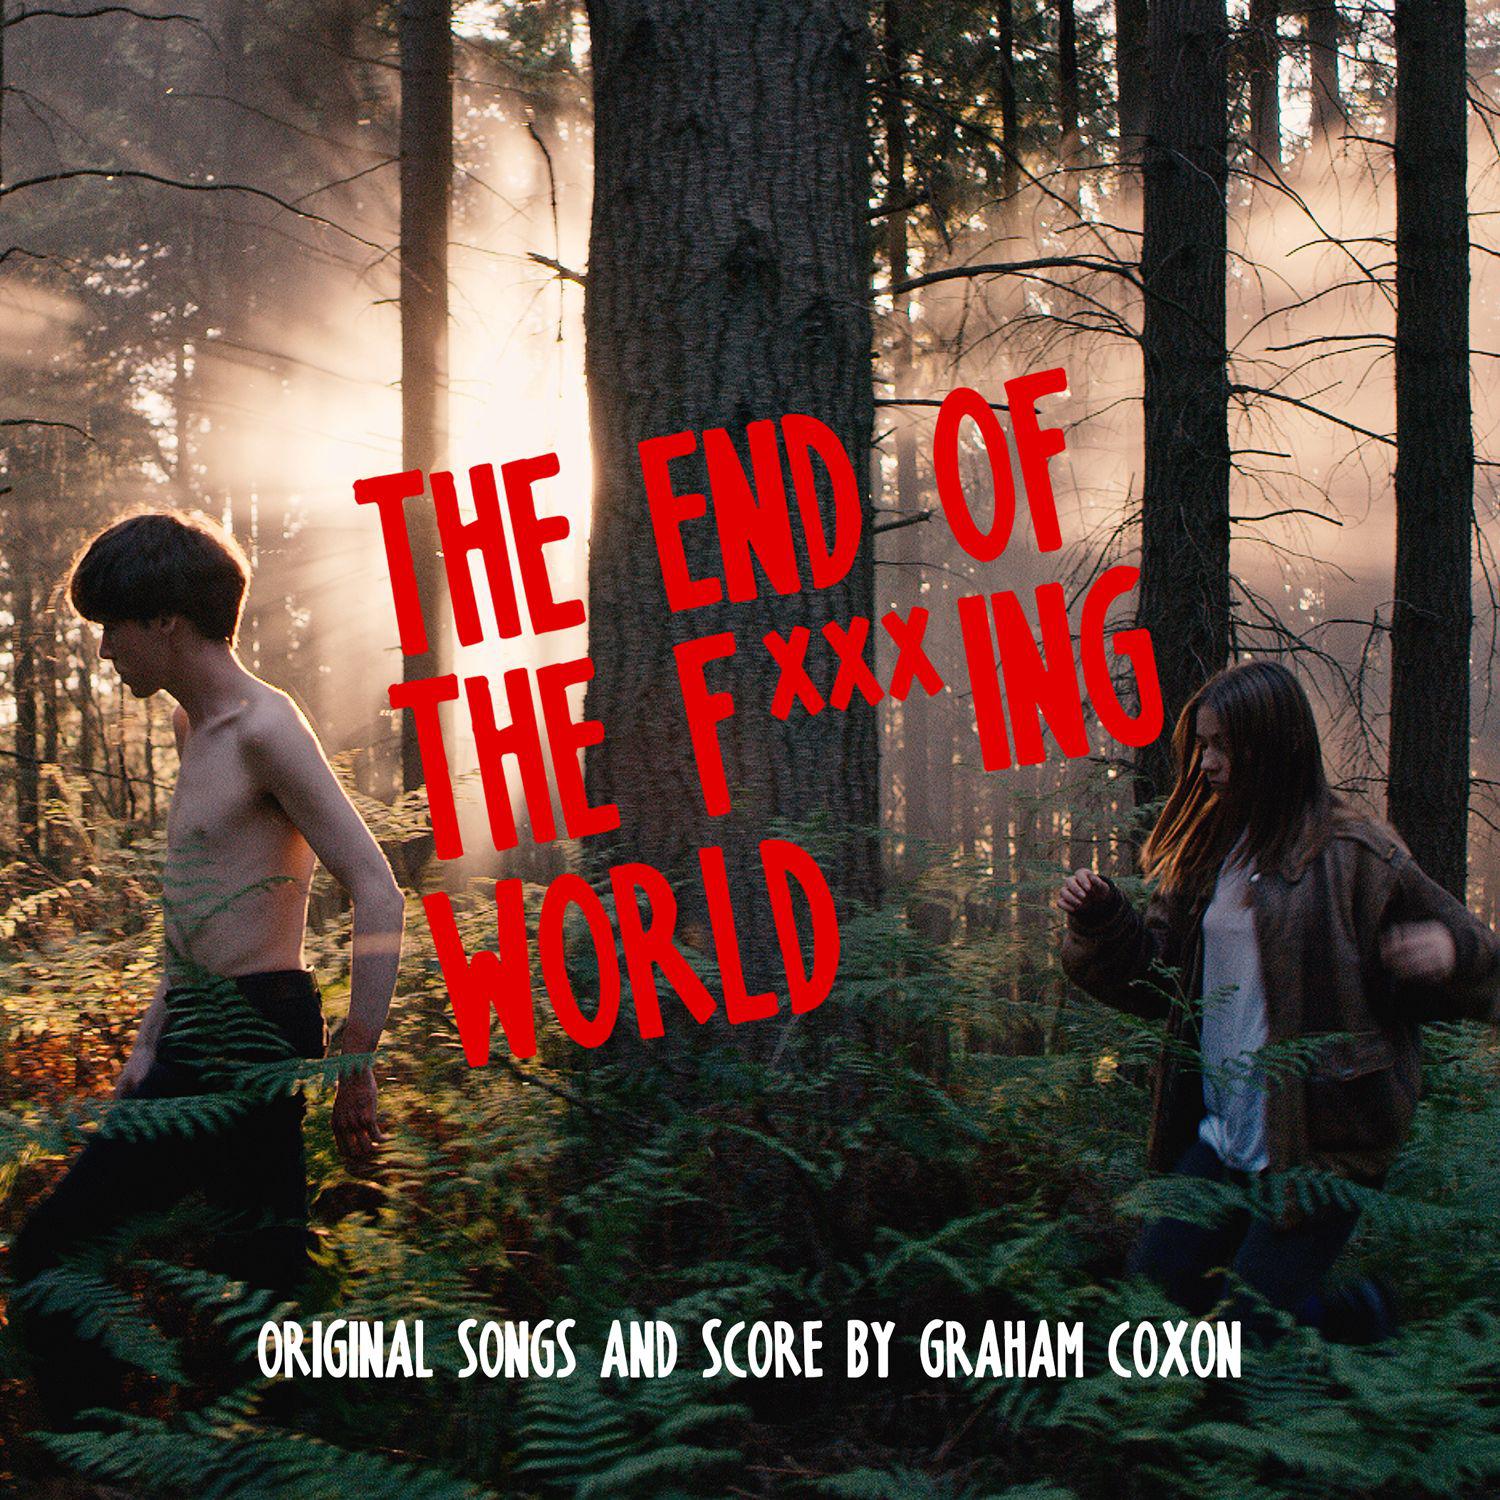 Angry Me歌词 歌手Graham Coxon-专辑The End Of The F***ing World (Original Songs and Score)-单曲《Angry Me》LRC歌词下载